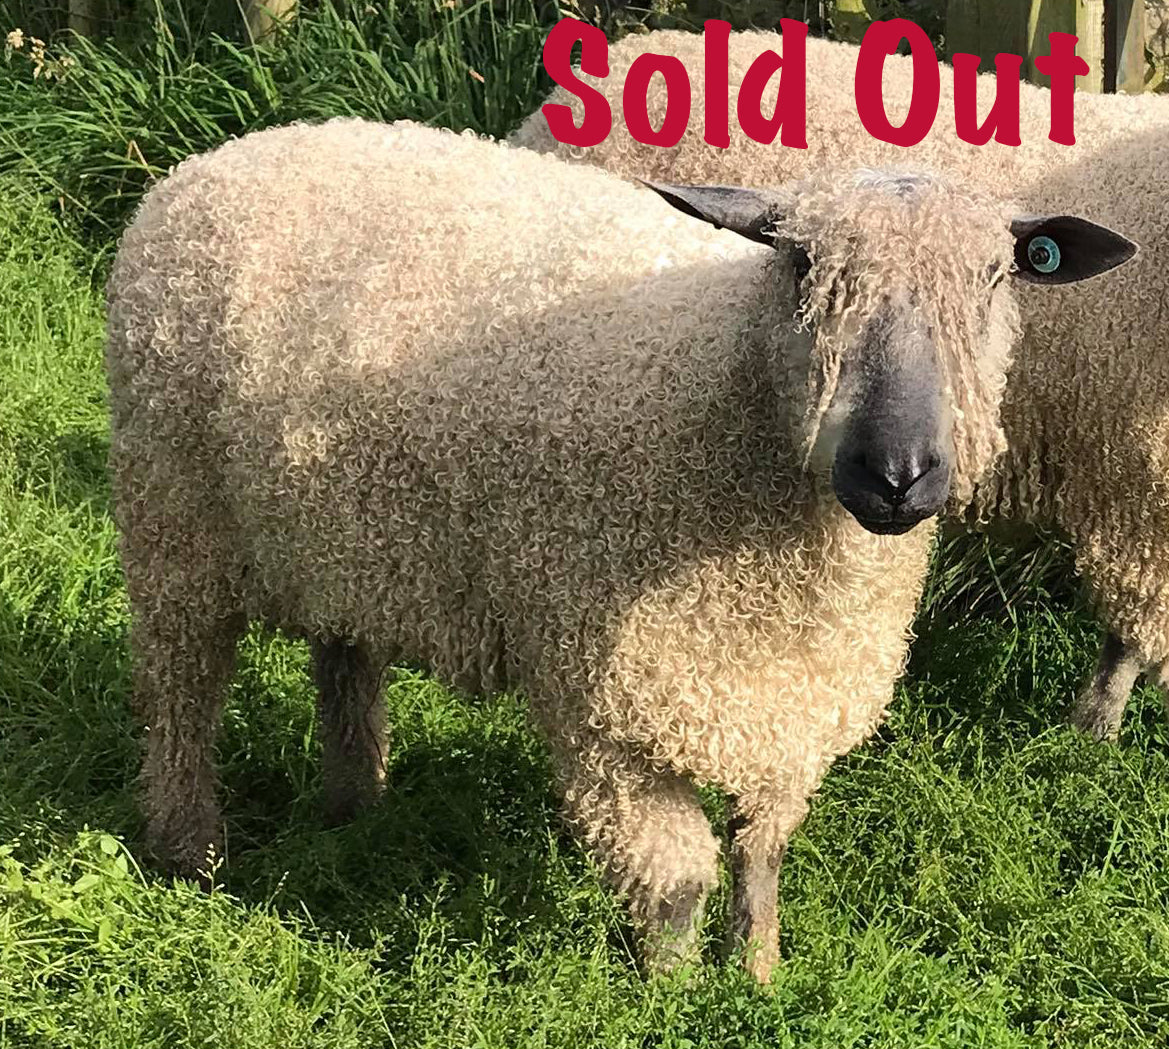 Wensleydale (white) "West End Brexiteer 7670" (694/18/757) (UK0107504-00757) - Tank #1 - Semen Imported into USA - Sold Out